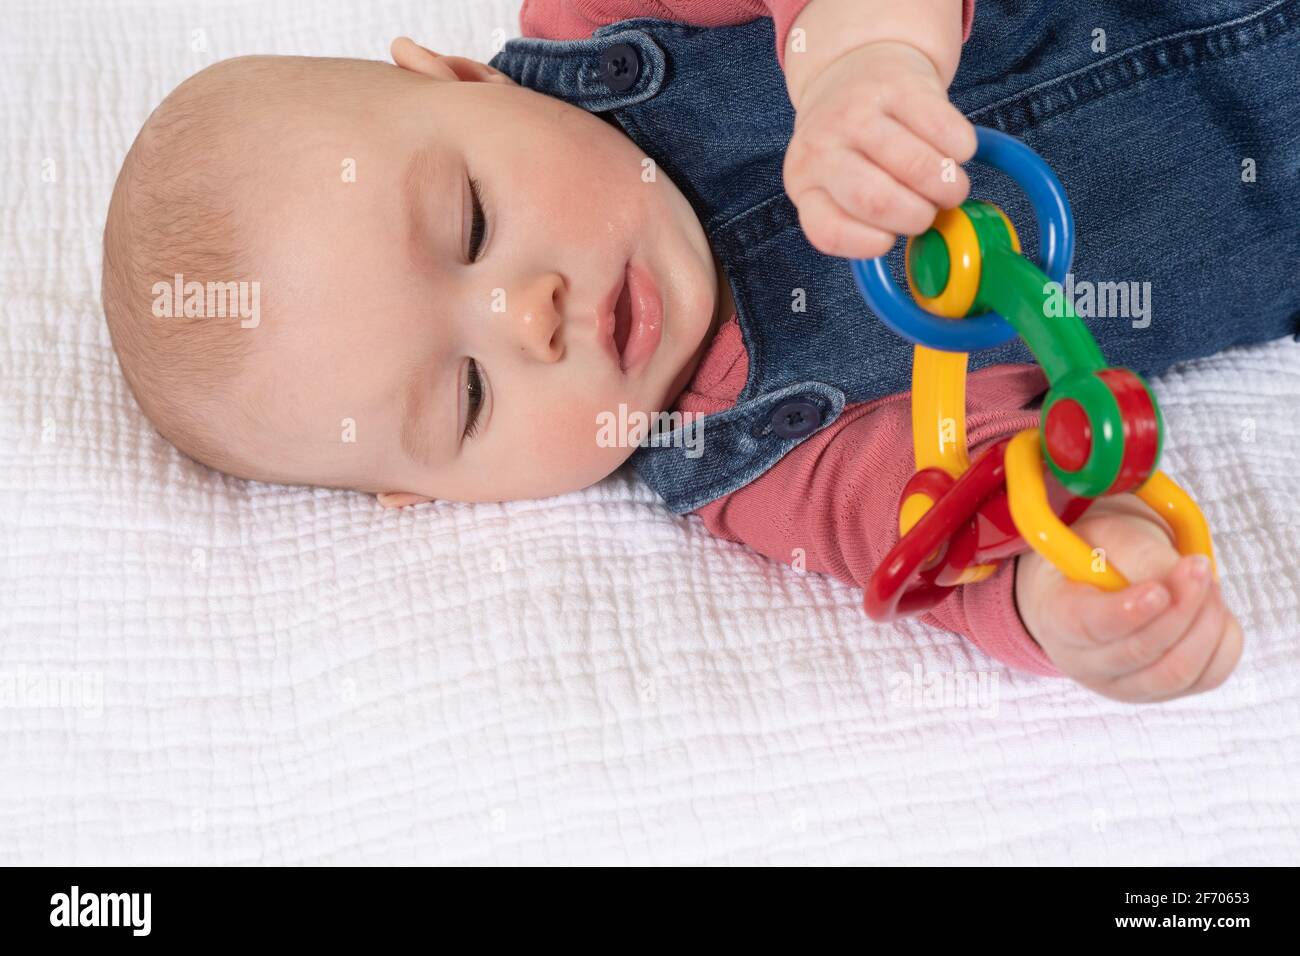 4 month old baby girl, holding toy using both hands Stock Photo